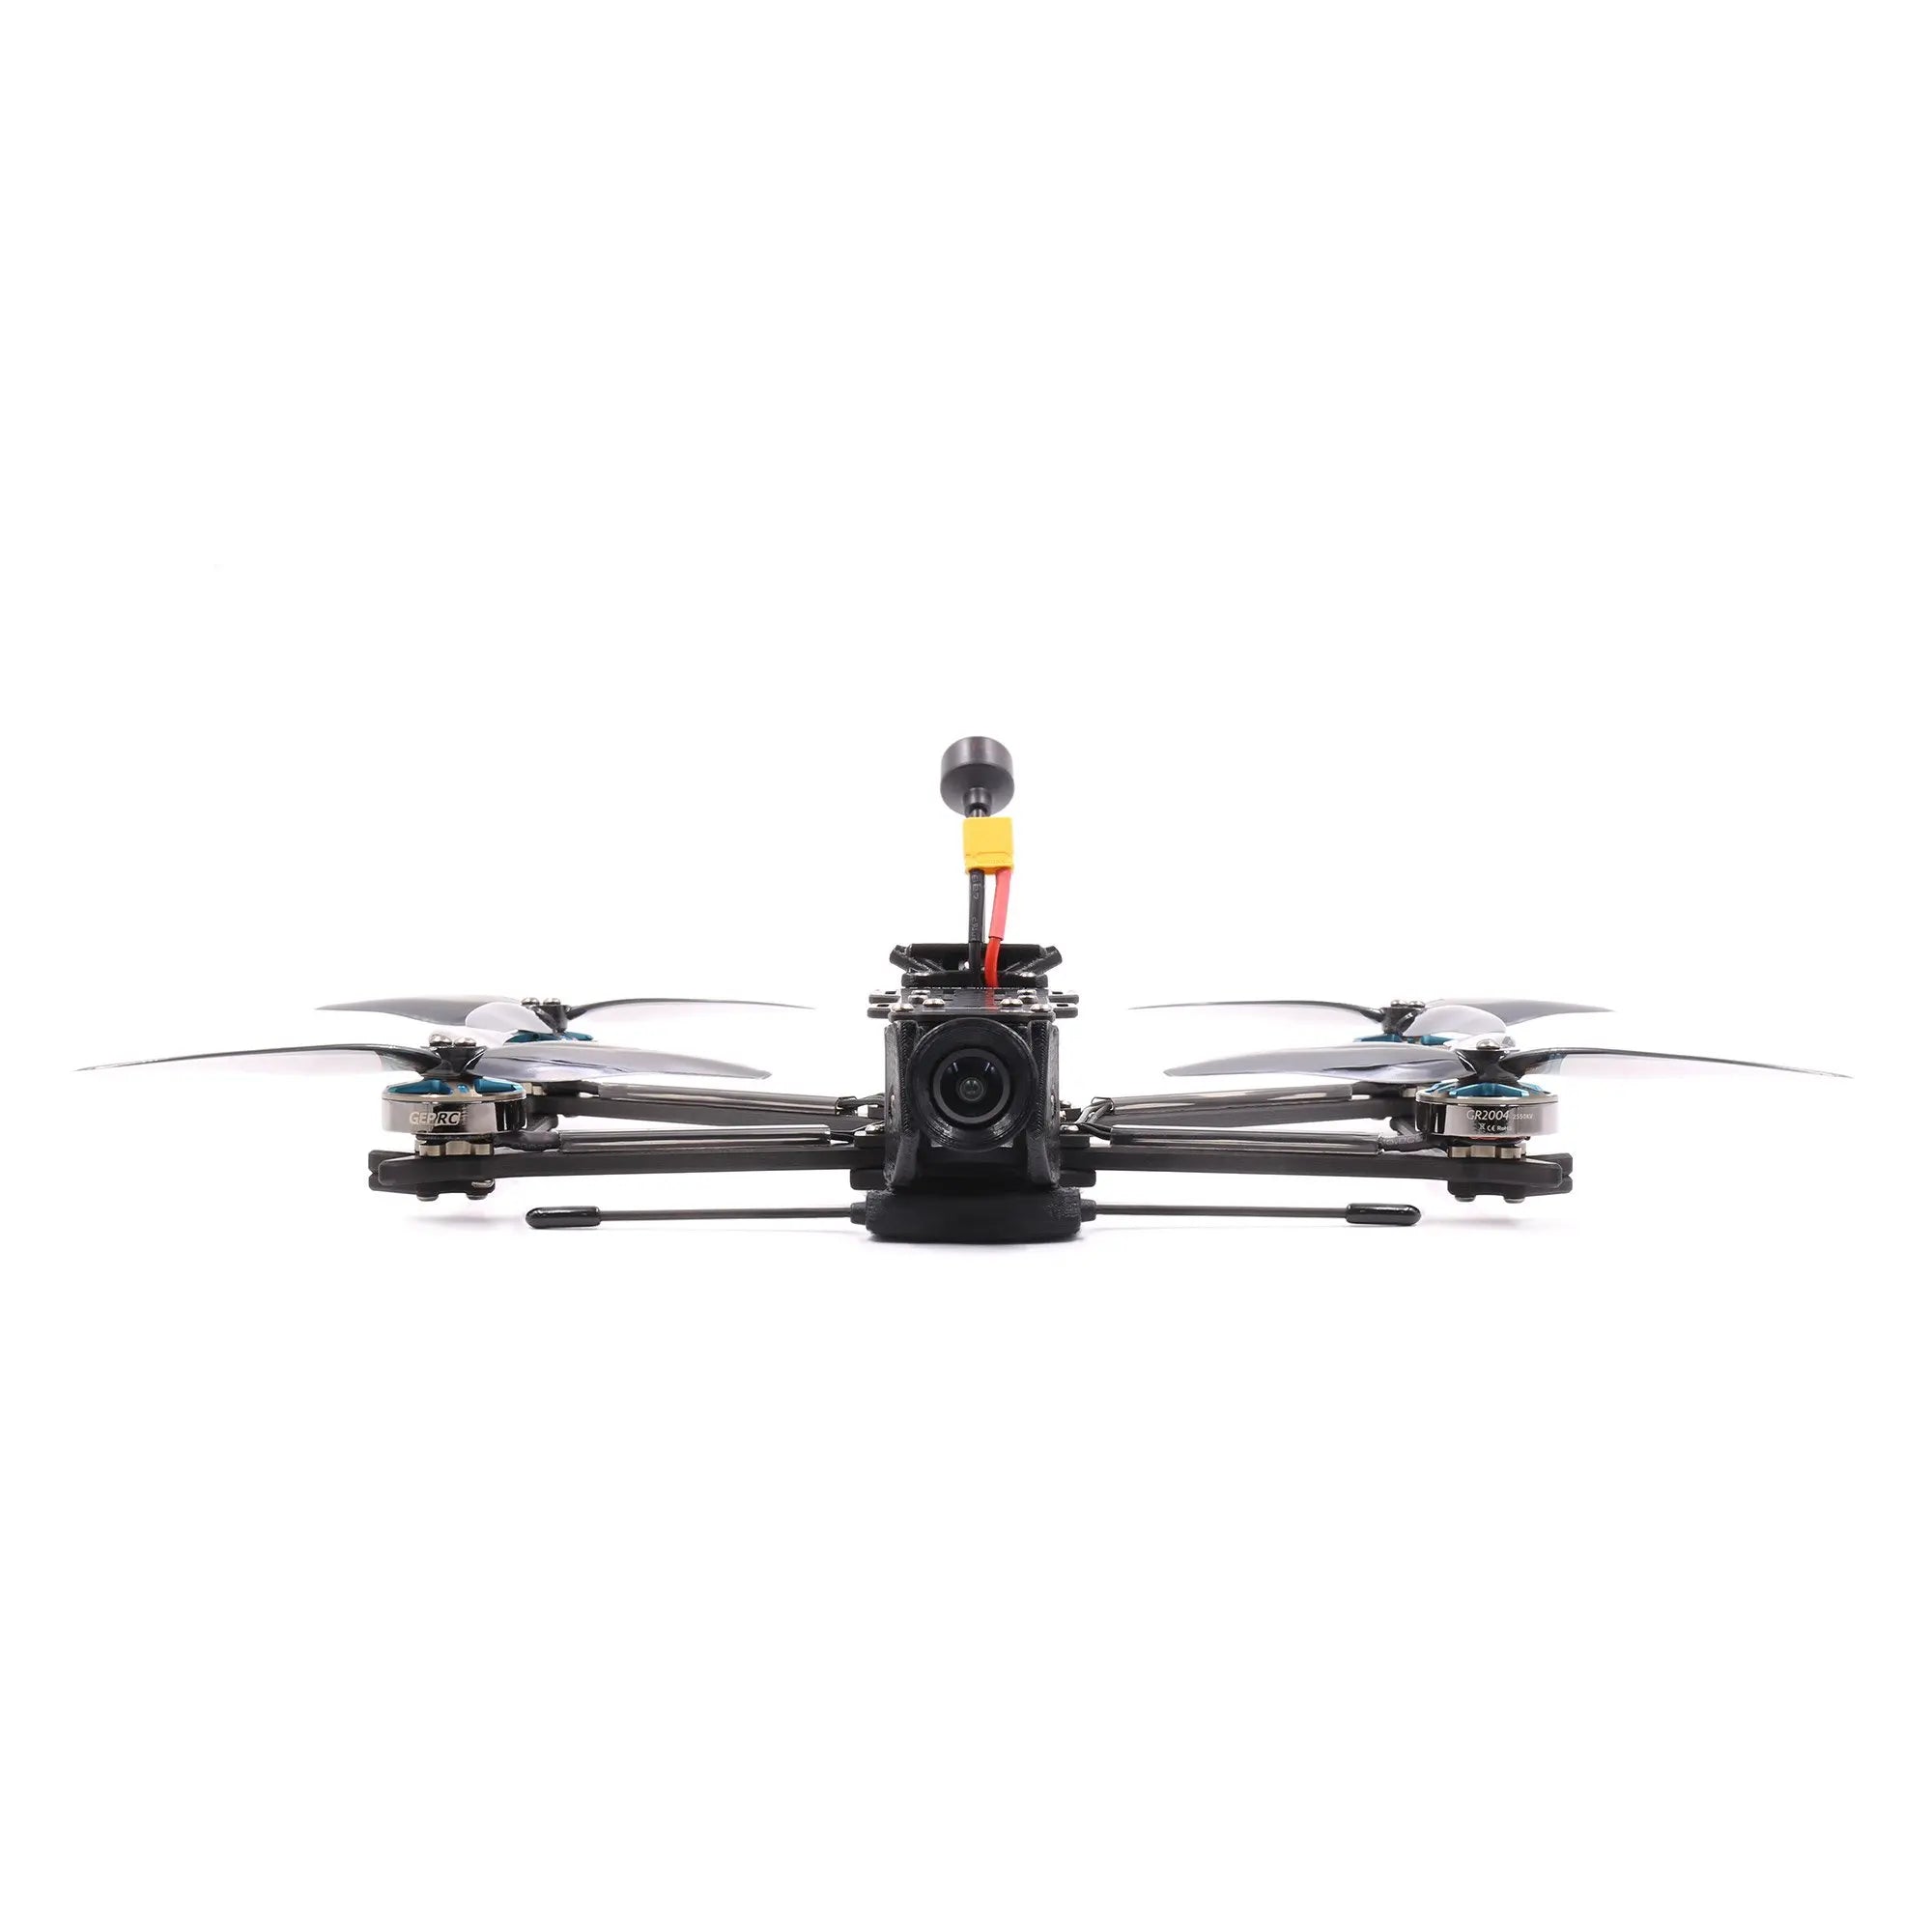 GEPRC Crocodile5 Baby FPV Drone, the LR HD Polar LongRange FPV system provides reliable and long-range video